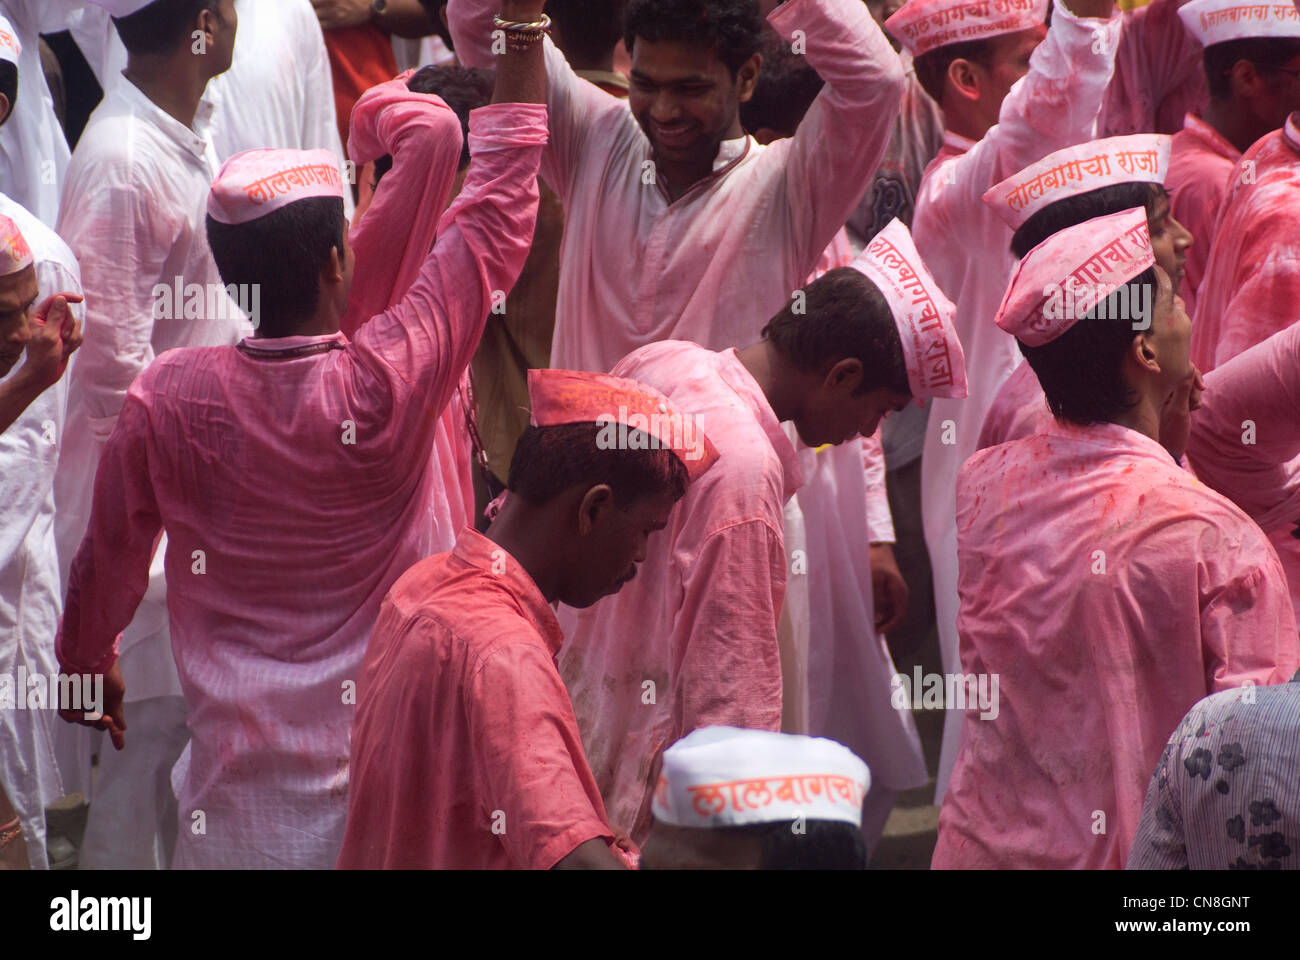 Devotees smeared in Pink Color during the Ganesh Visarjan procession - Lalbaug, Mumbai, India Stock Photo